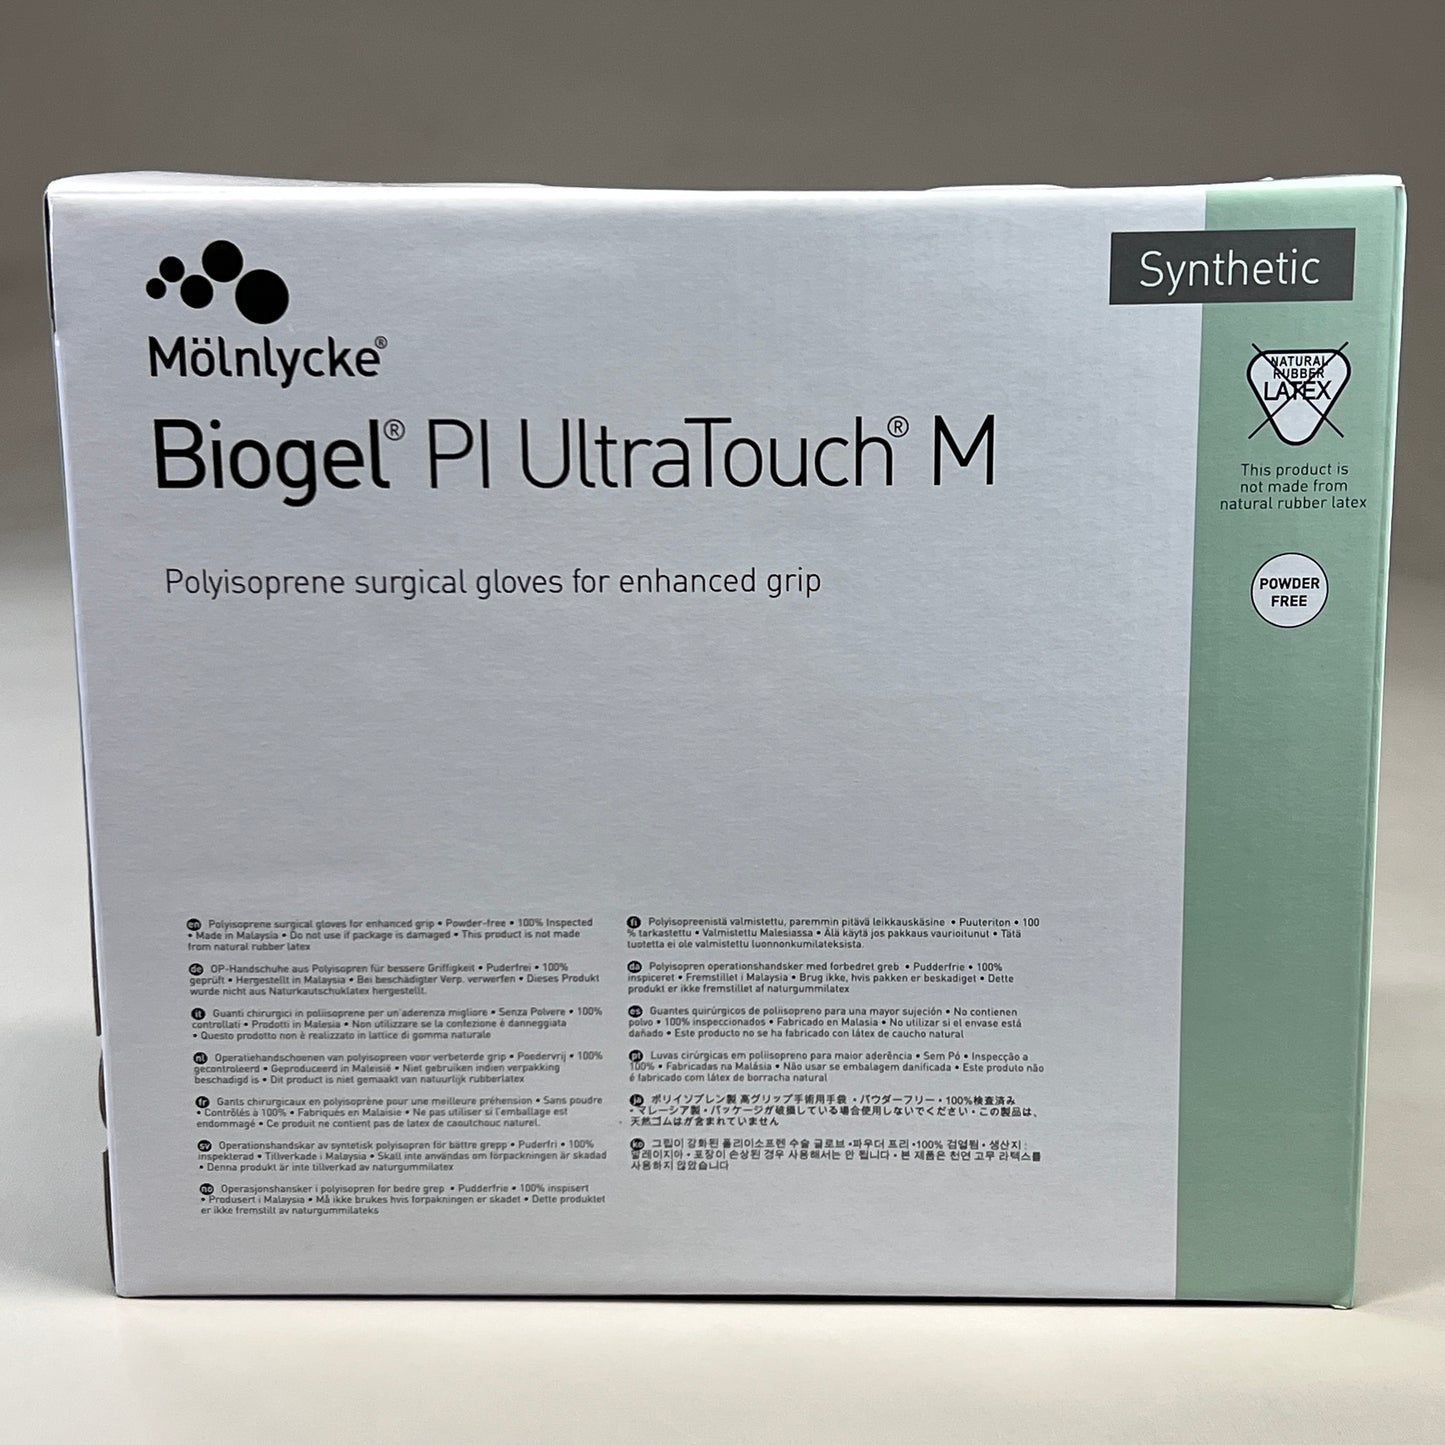 MOLNLYCKE Biogel PI UltraTouch M Polyisoprene Surgical Gloves SZ 7 Straw Yellow 50 Pairs 42670 (New)